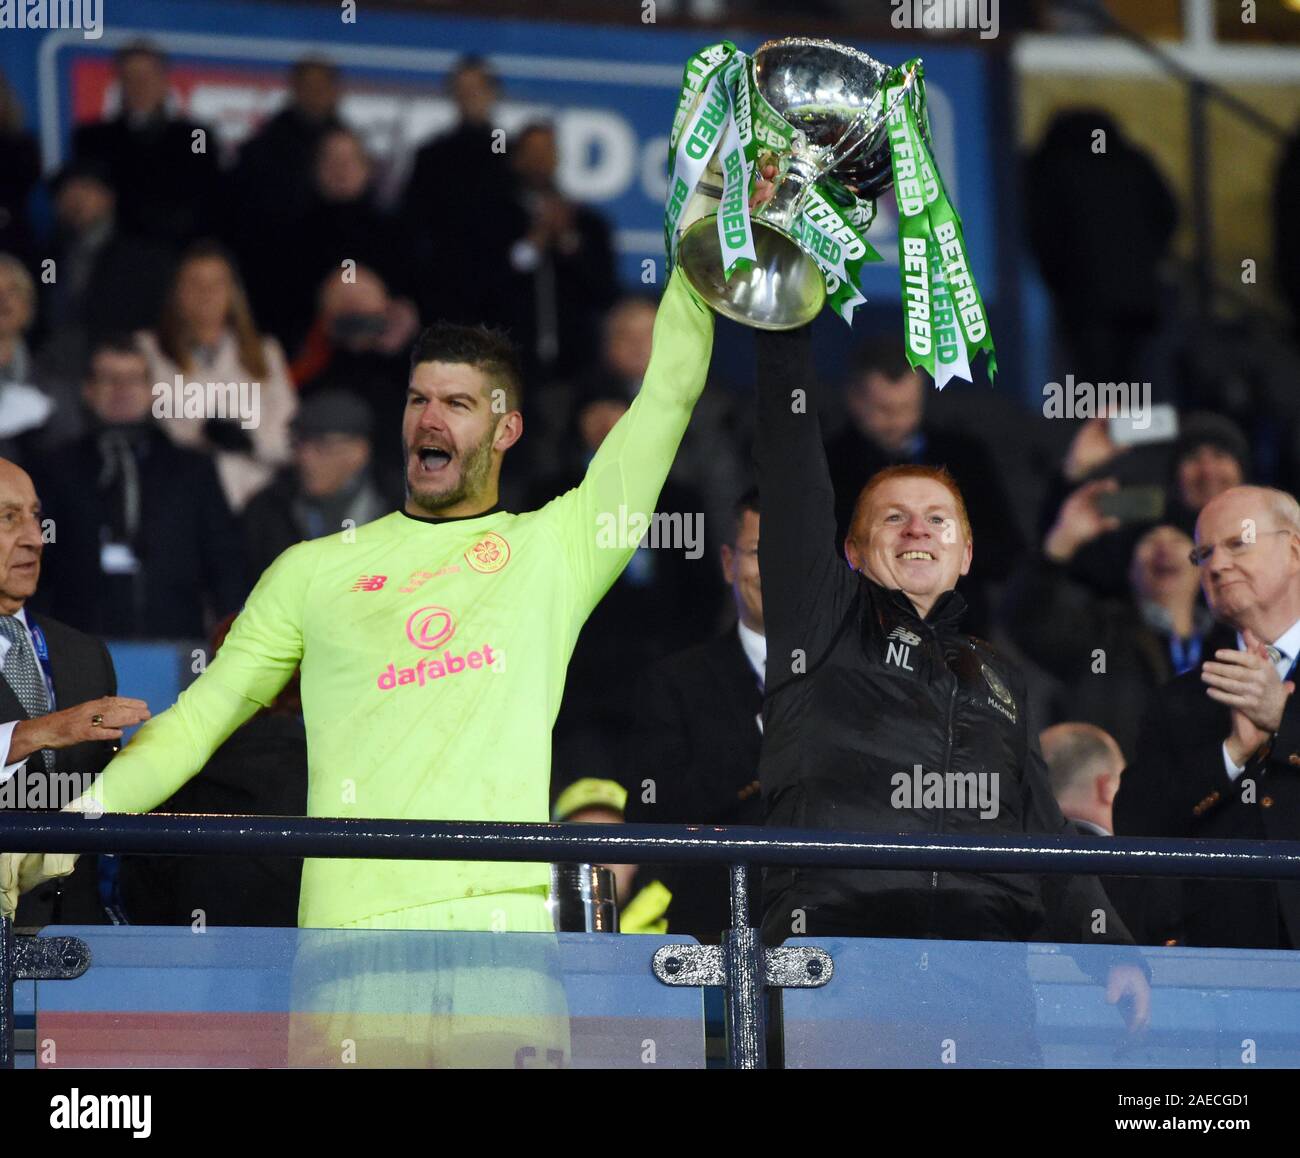 Hampden Park, Glasgow. Scotland.UK.8th Dec 2019. Rangers vs Celtic. Betfred, Scottish League Cup Final. Celtic Hero keeper Fraser Forster (Penalty save)  & Manager Neil Lennon with the trophy Credit: eric mccowat/Alamy Live News Stock Photo